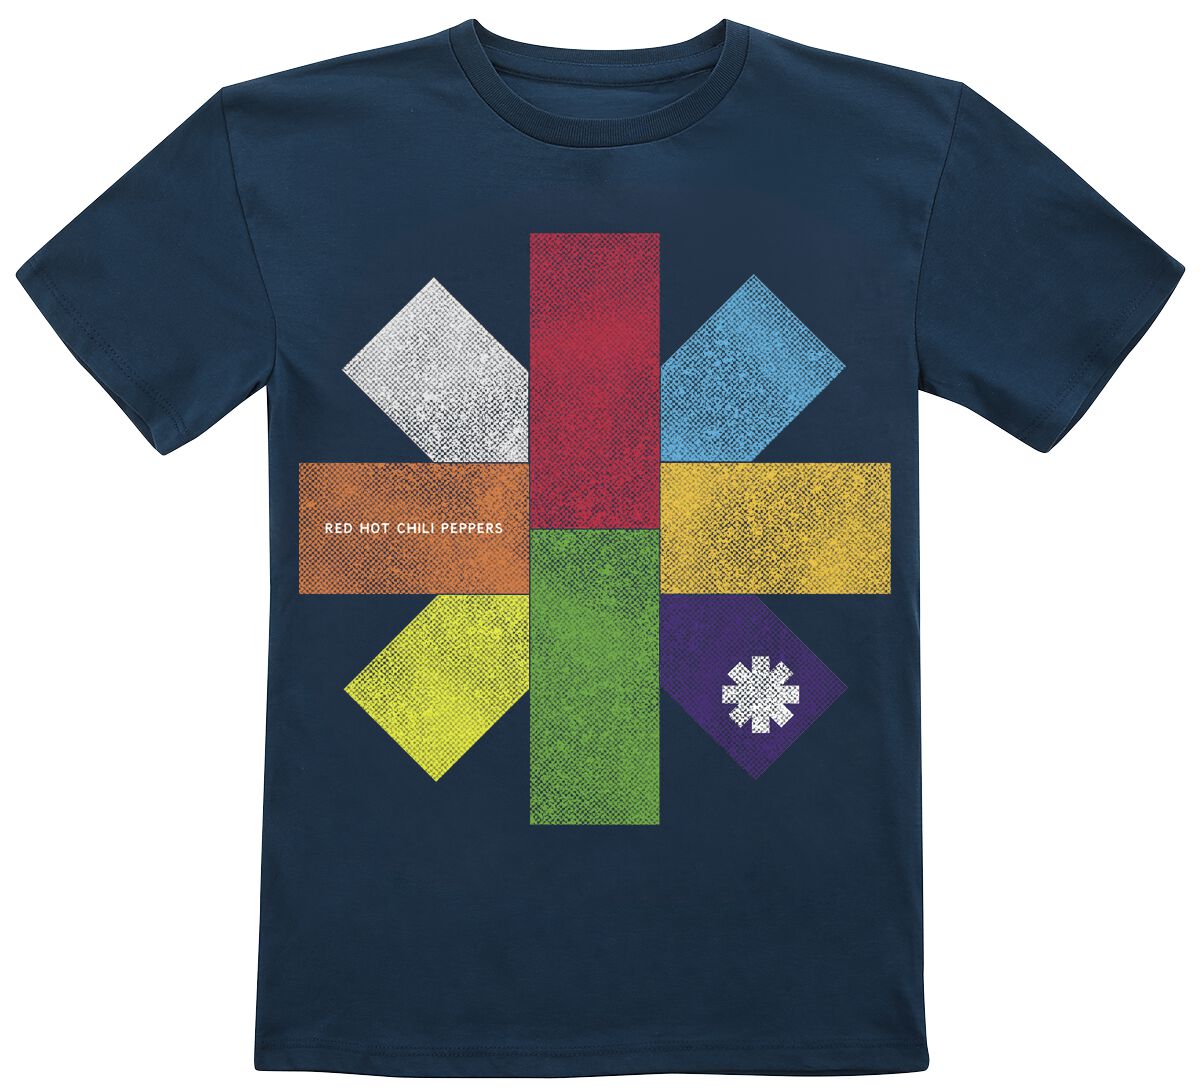 Red Hot Chili Peppers Kids - Colour Block T-Shirt navy